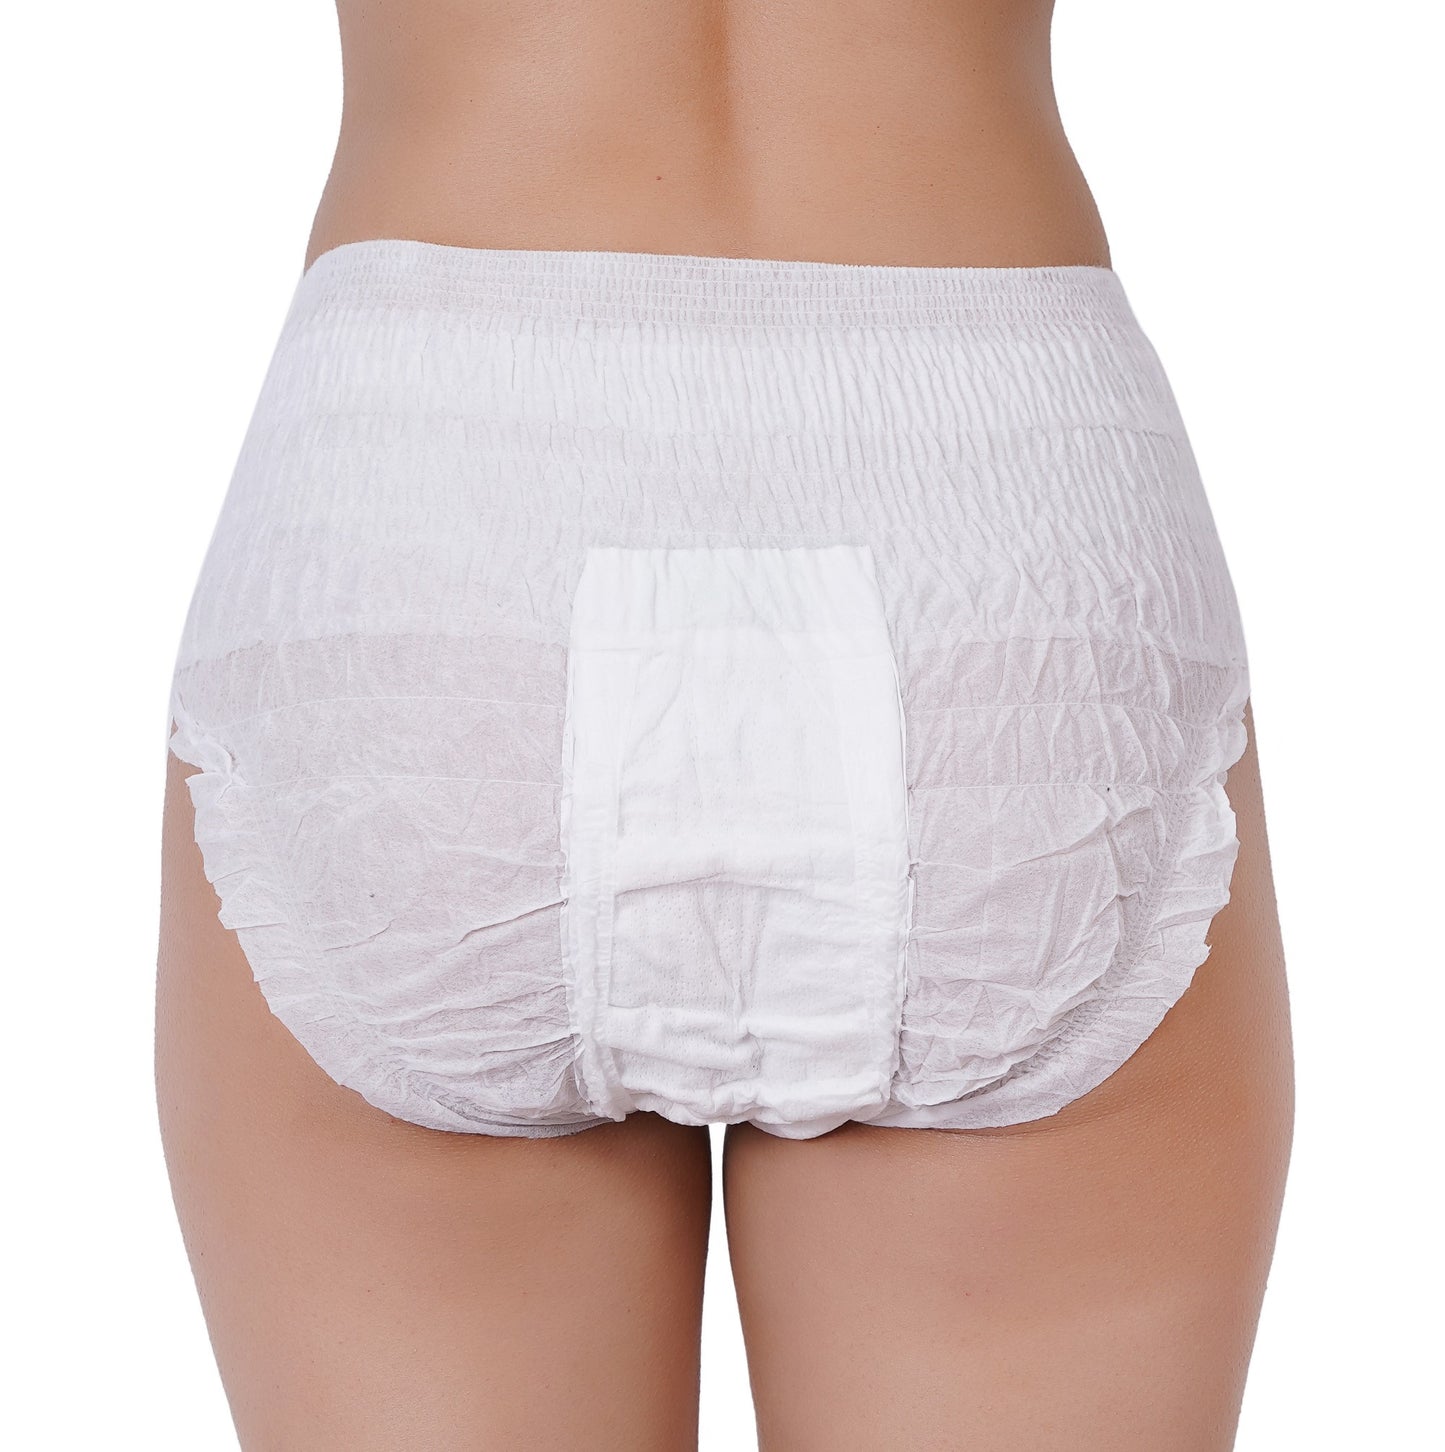 Fabpad Ultra Absorbent Disposable (Use & Throw) Period Panties - Pack of 10